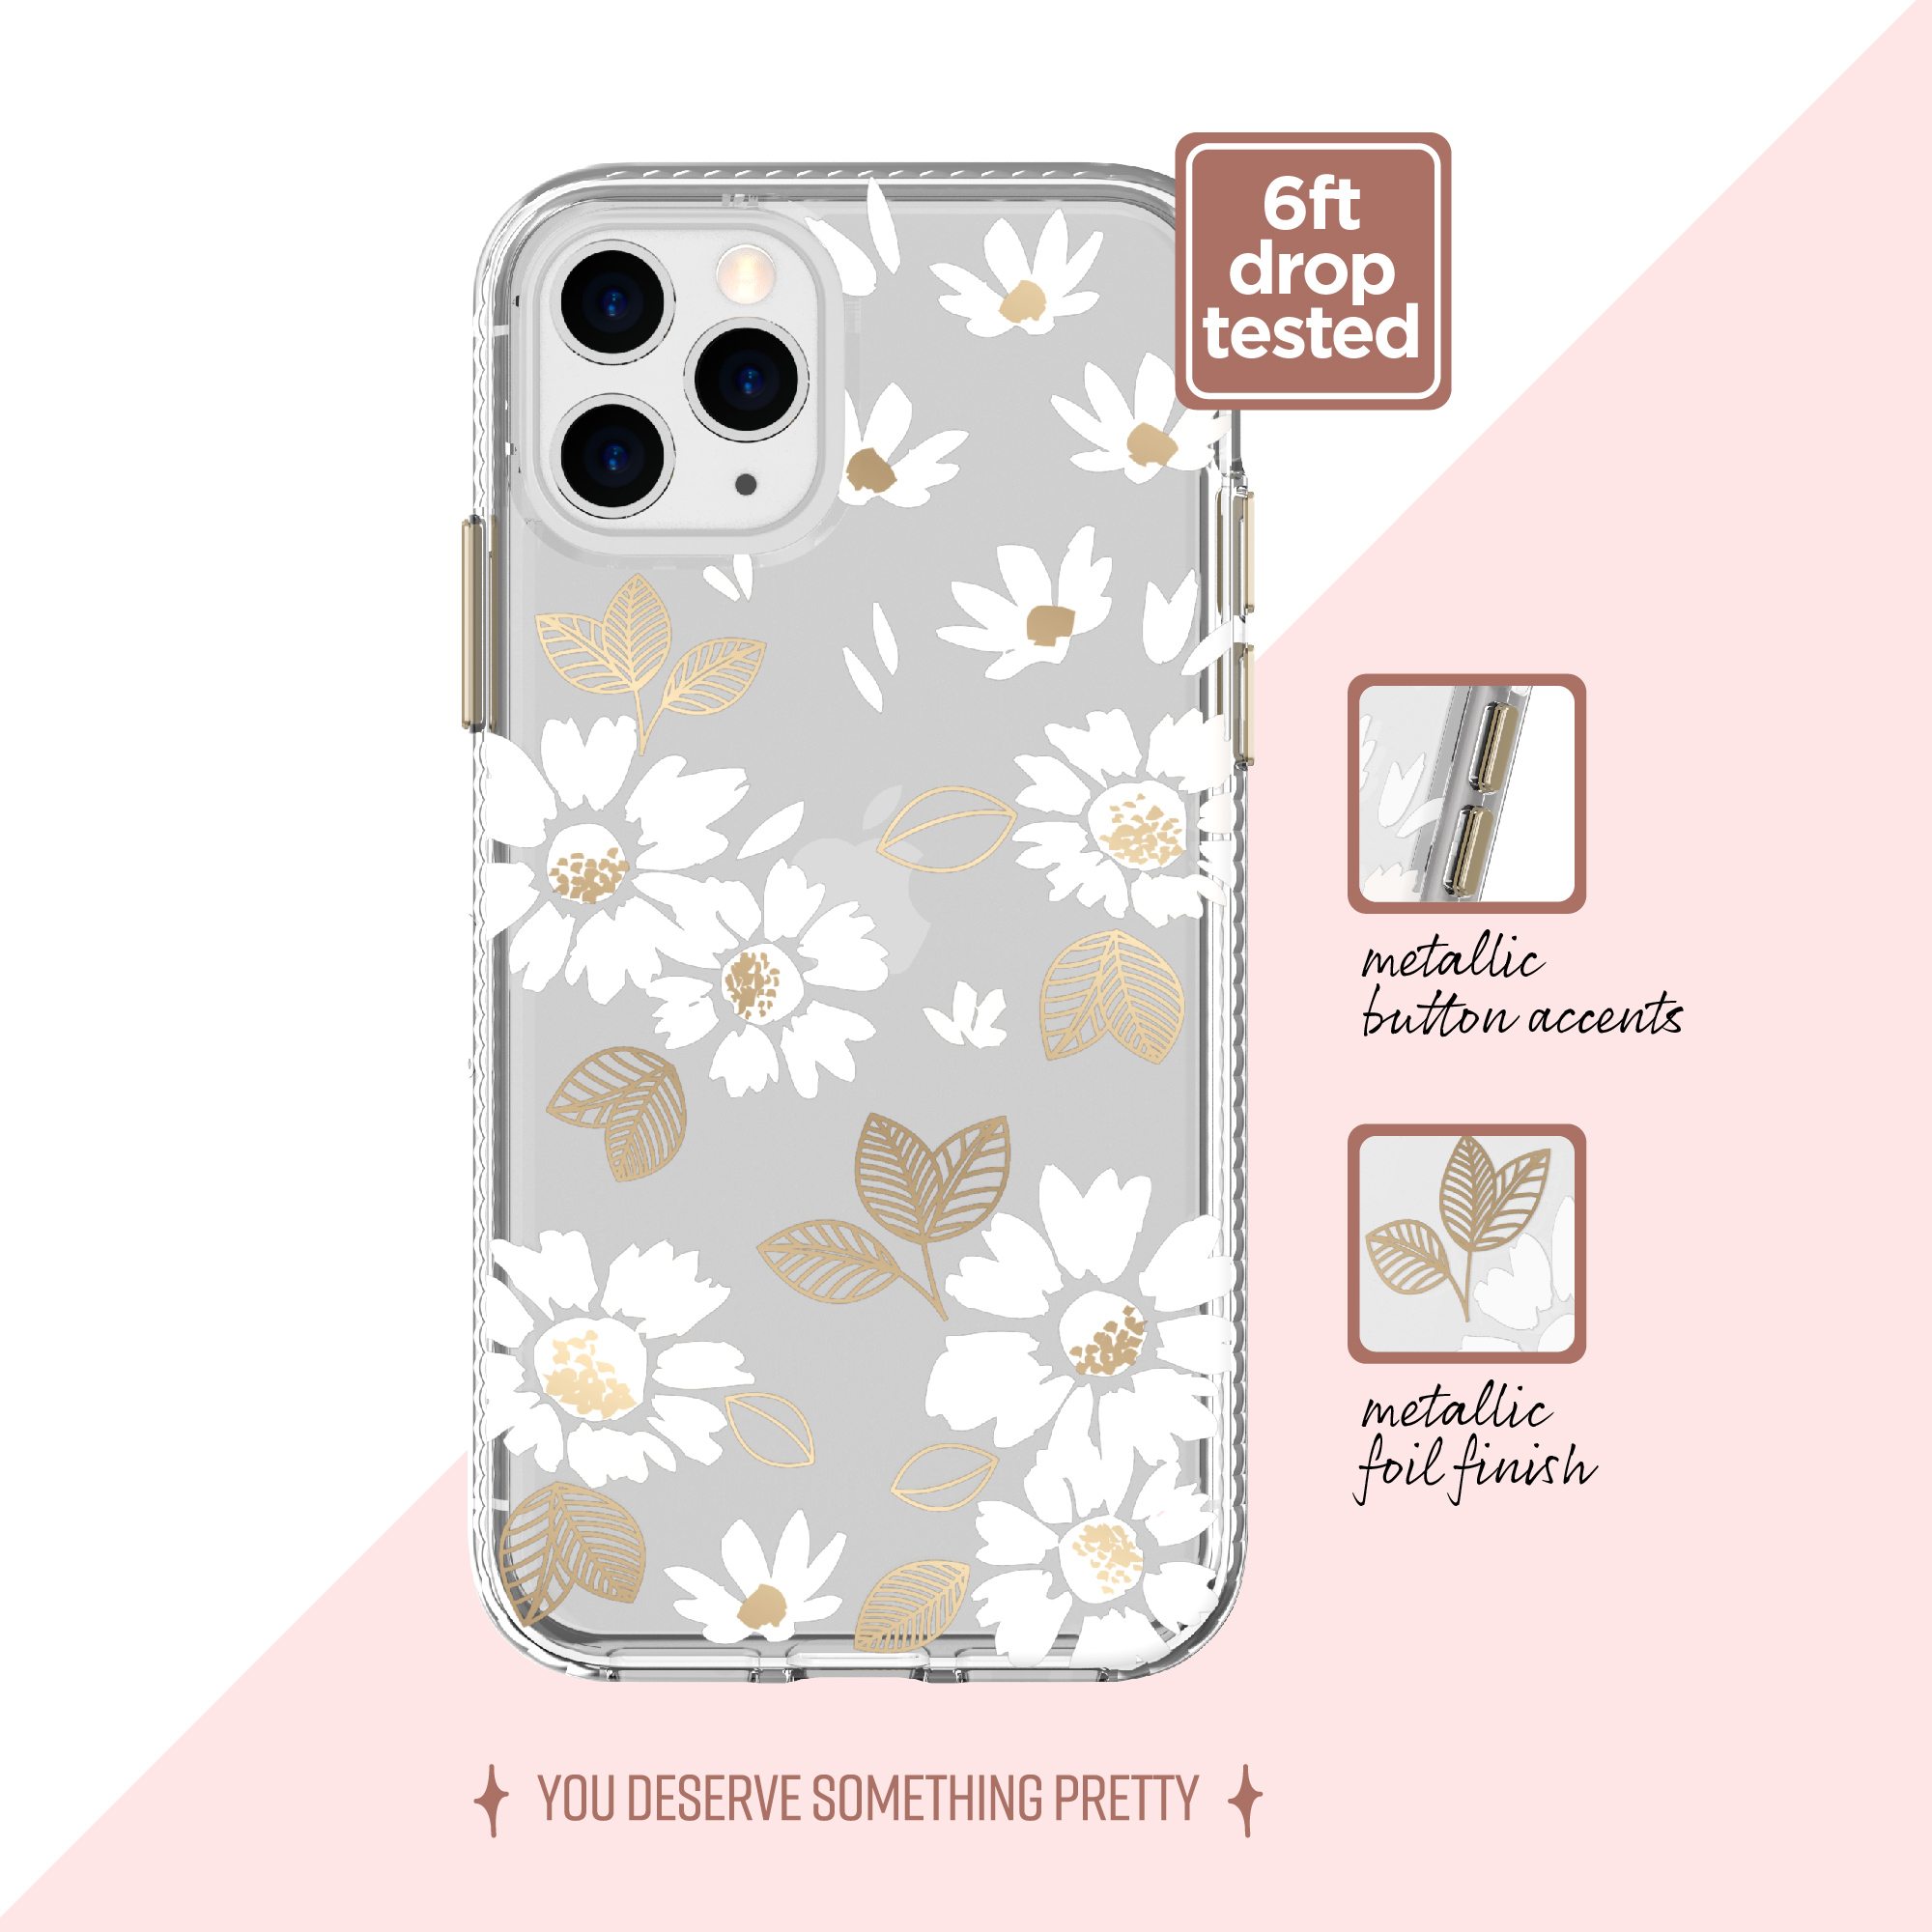 Clear White Floral Phone Case for iPhone 11 Pro - image 1 of 5